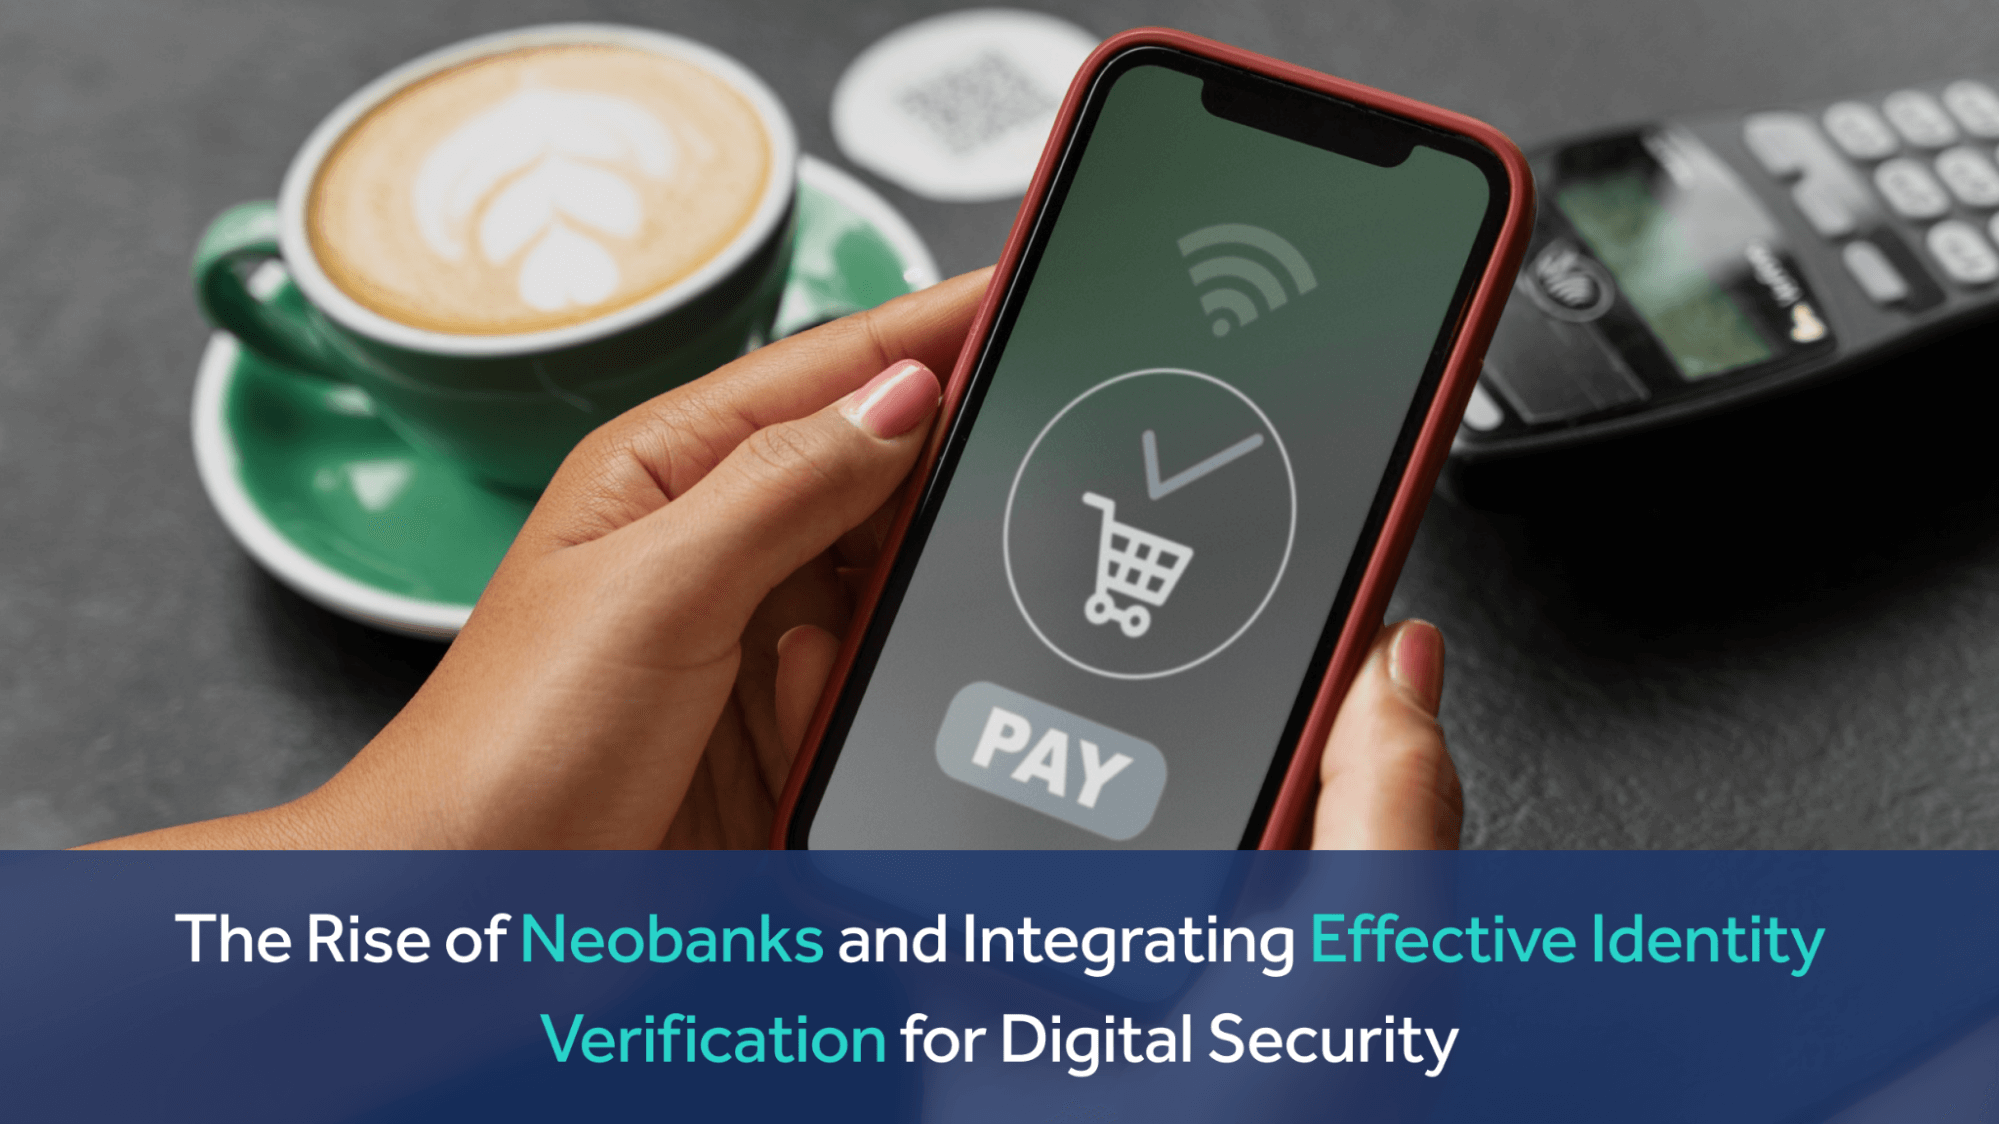 The Rise of Neobanks and Integrating Effective Identity Verification for Digital Security